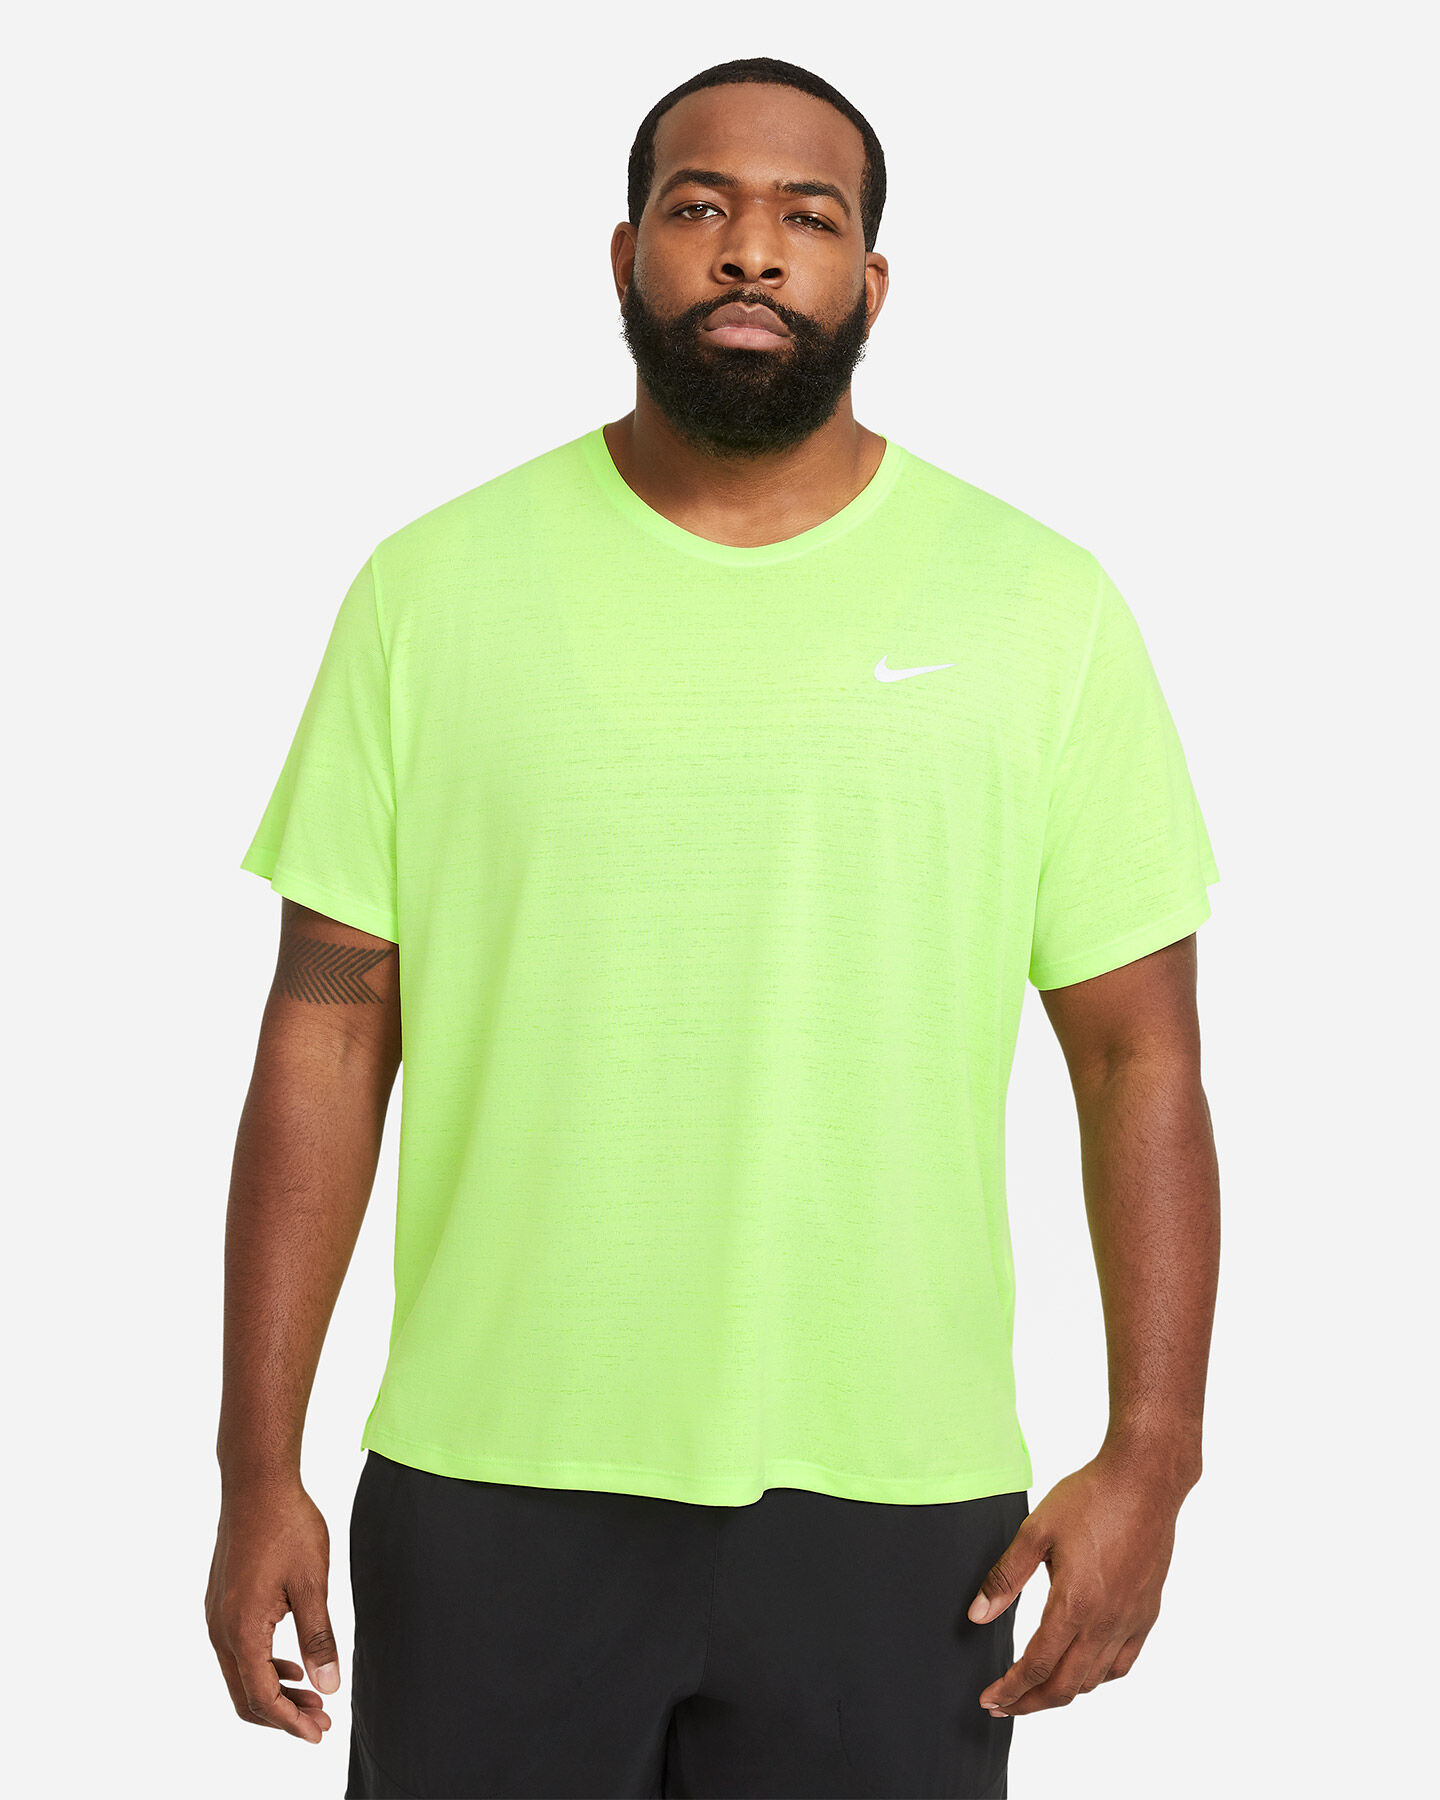  T-Shirt running NIKE DRI FIT MILER M S5268726|358|S scatto 0